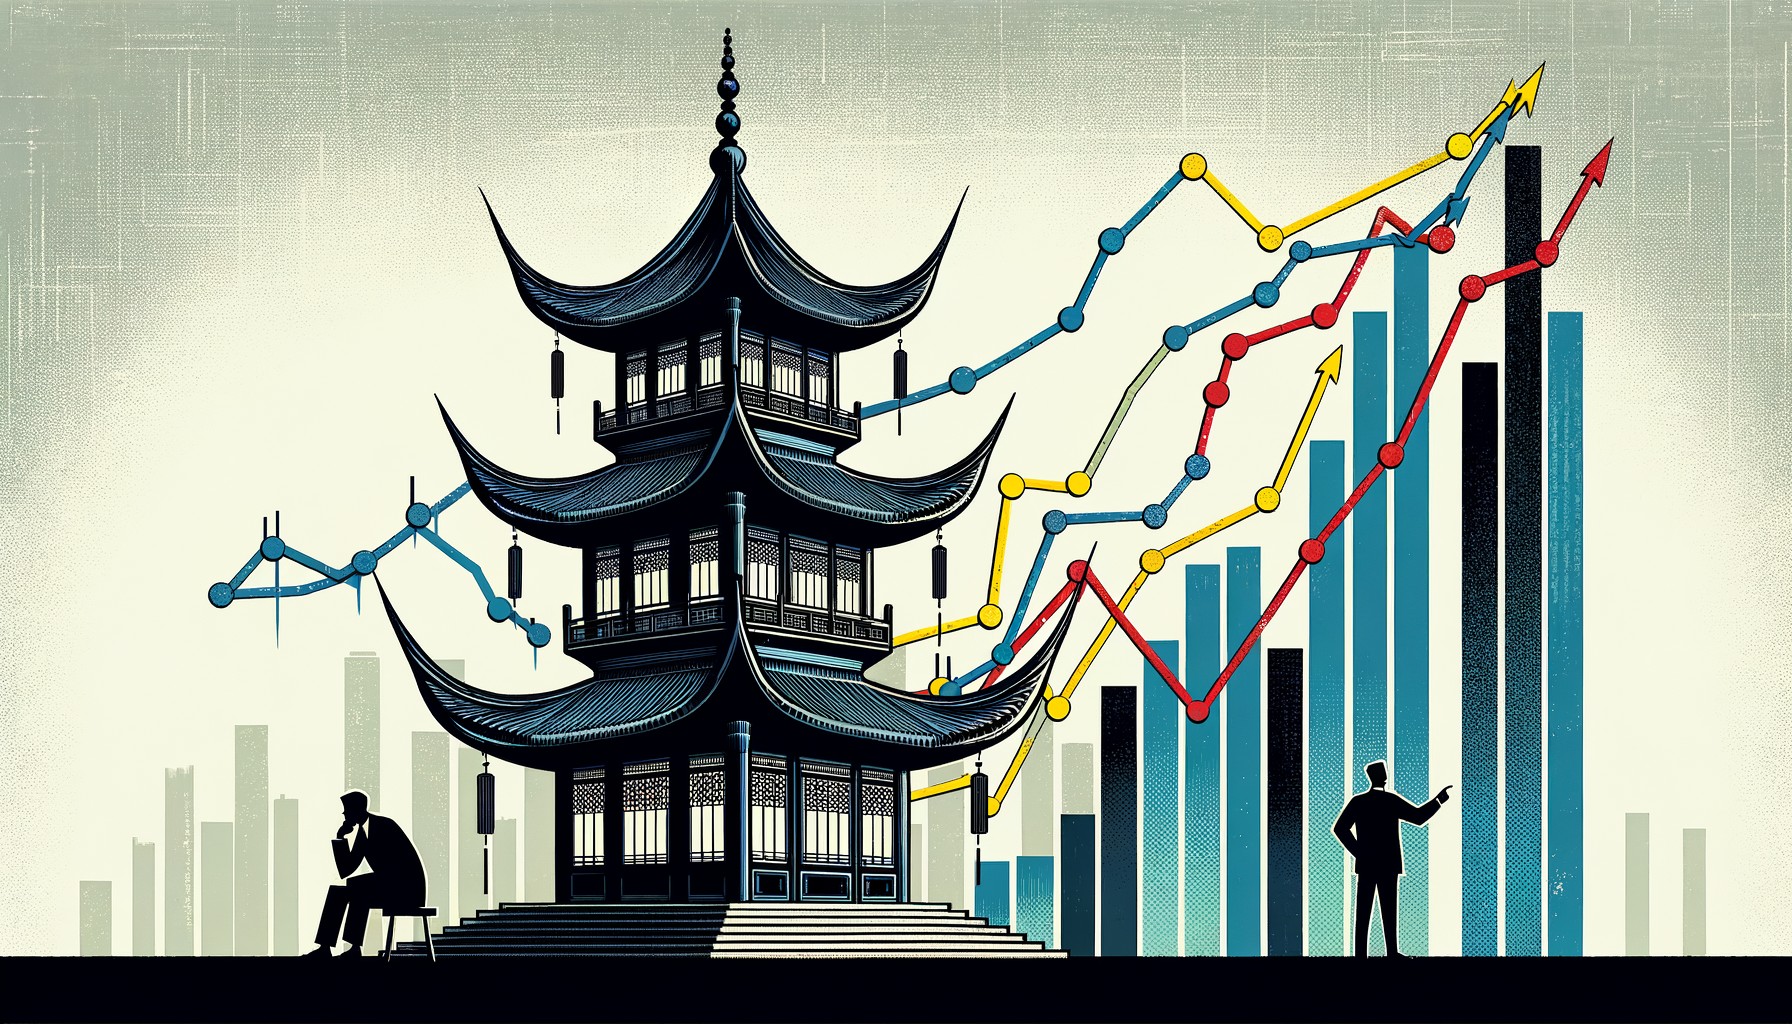 China’s economic recovery threatens to slow, investors look for value opportunities